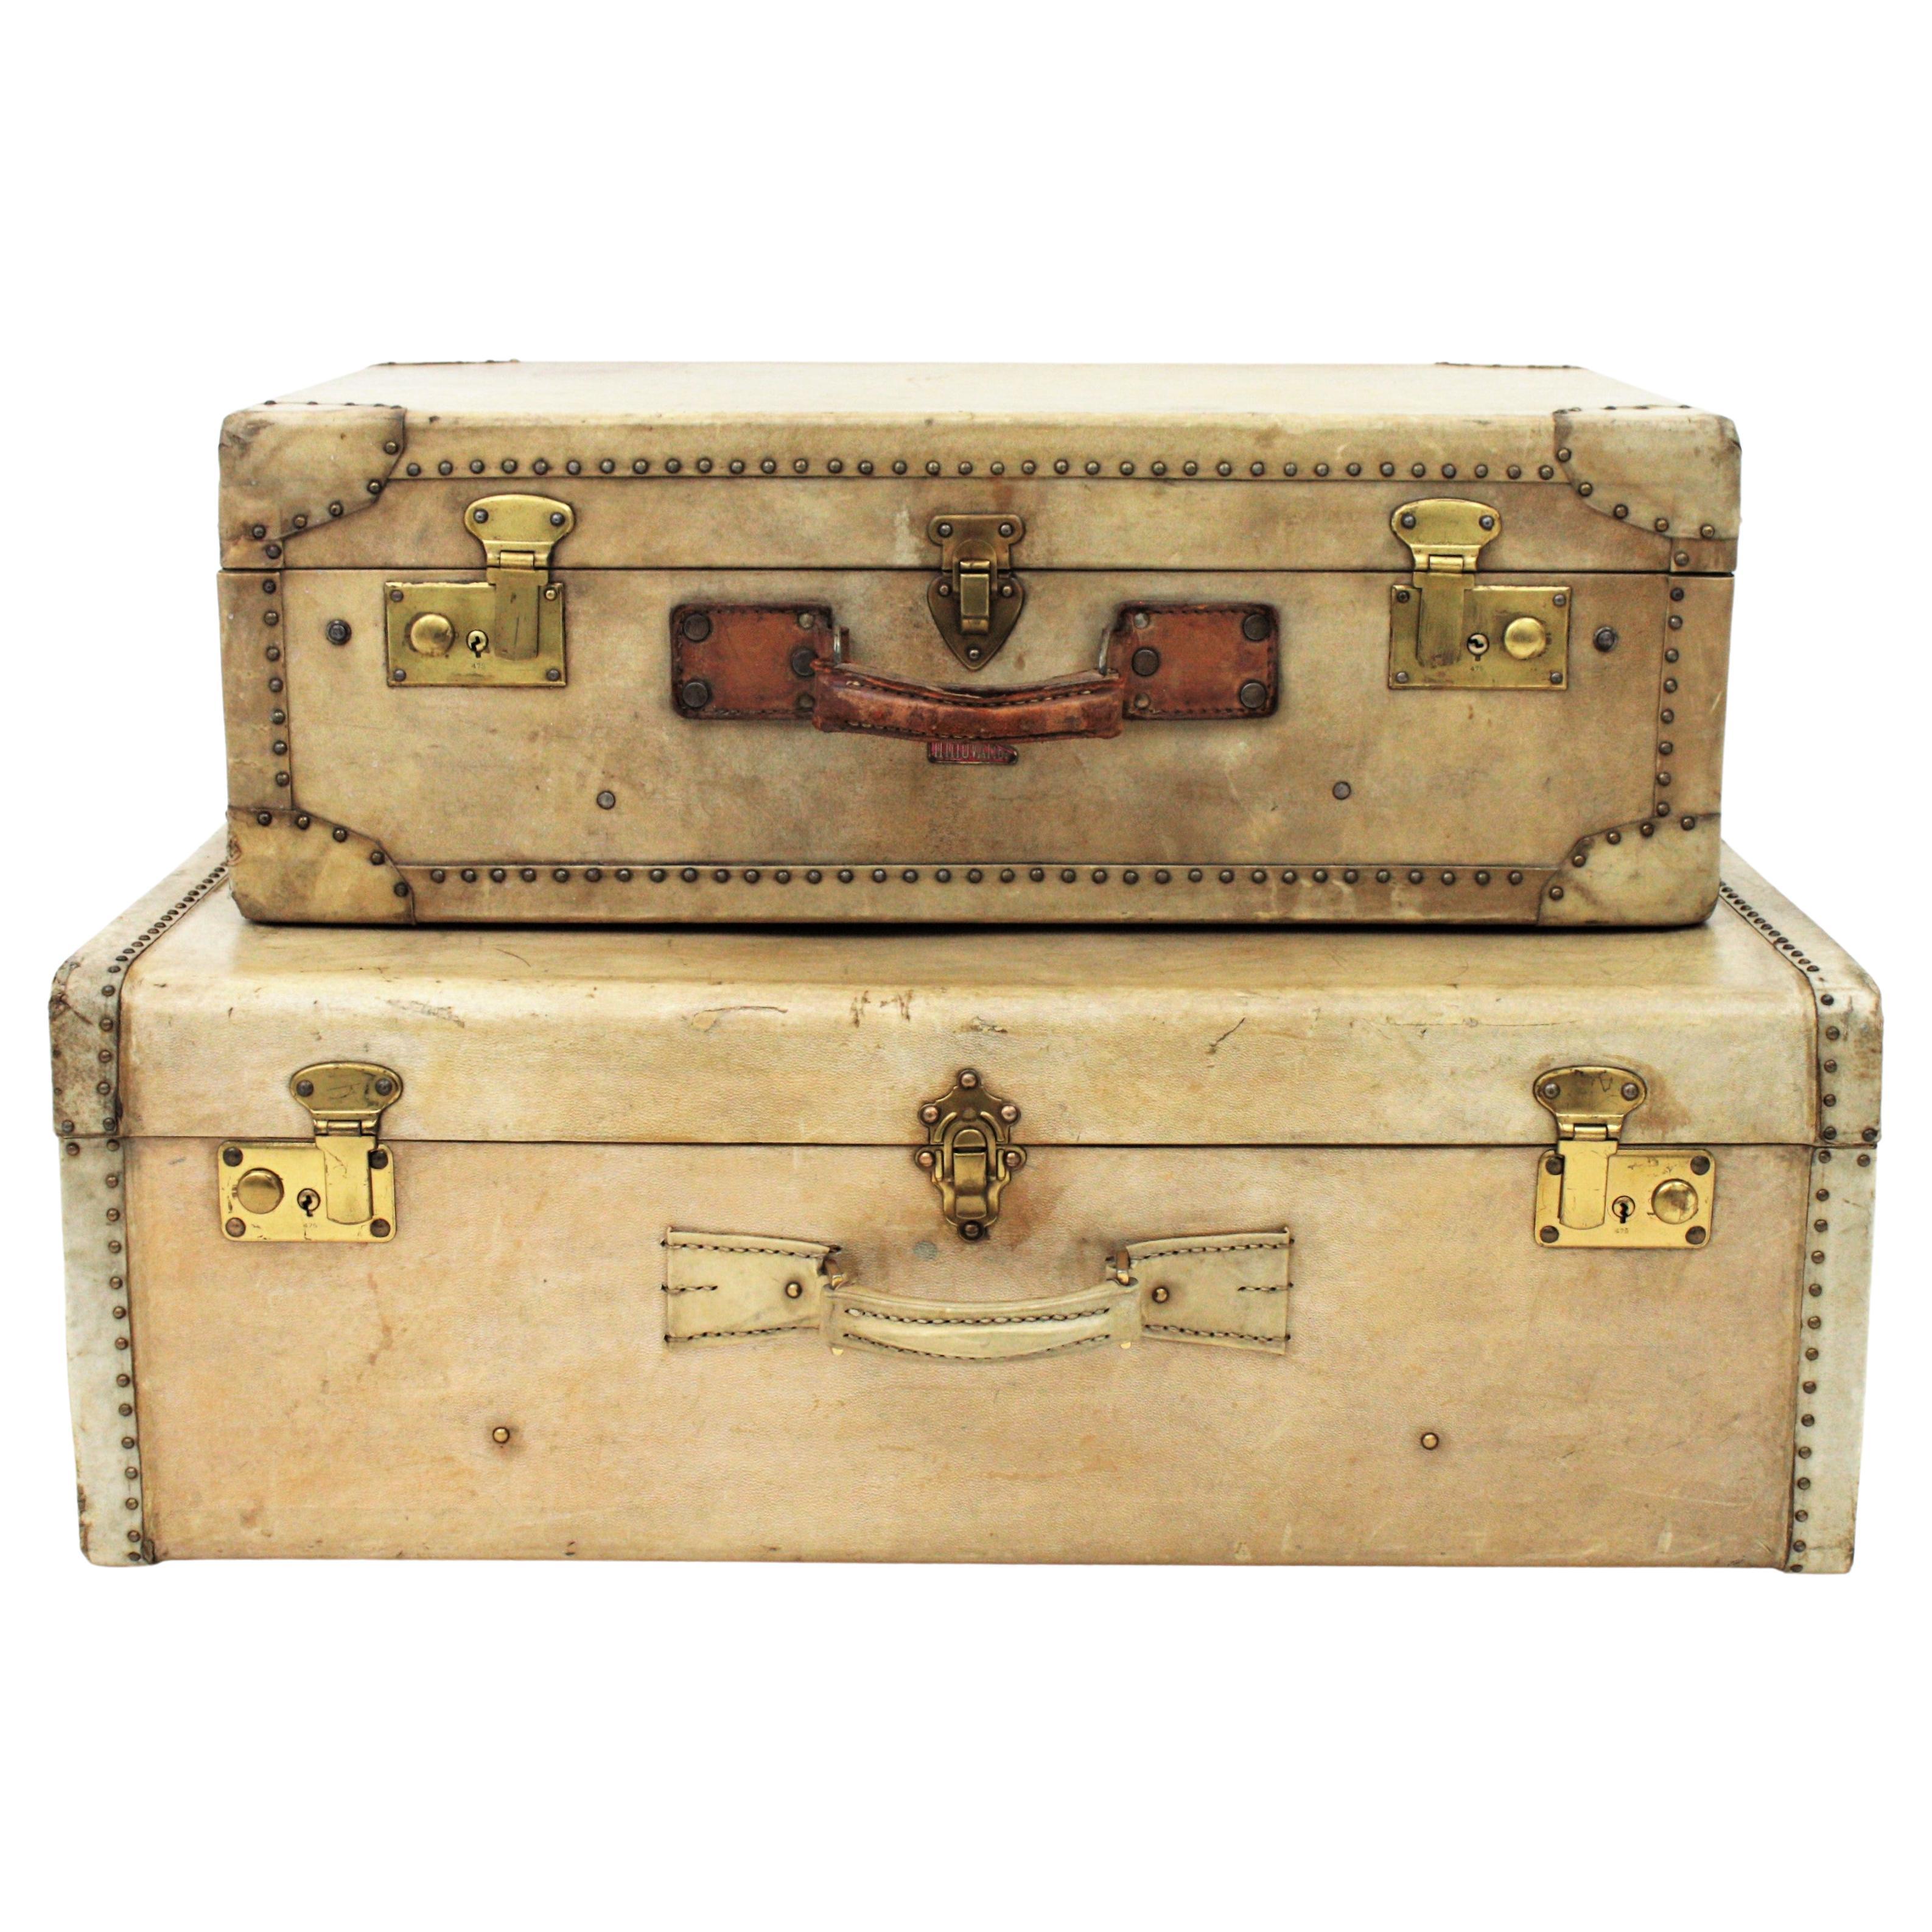 French Parchment / Vellum Suitcases as Side Table For Sale at 1stDibs |  1930s suitcase, 1930 suitcase, 1930s luggage